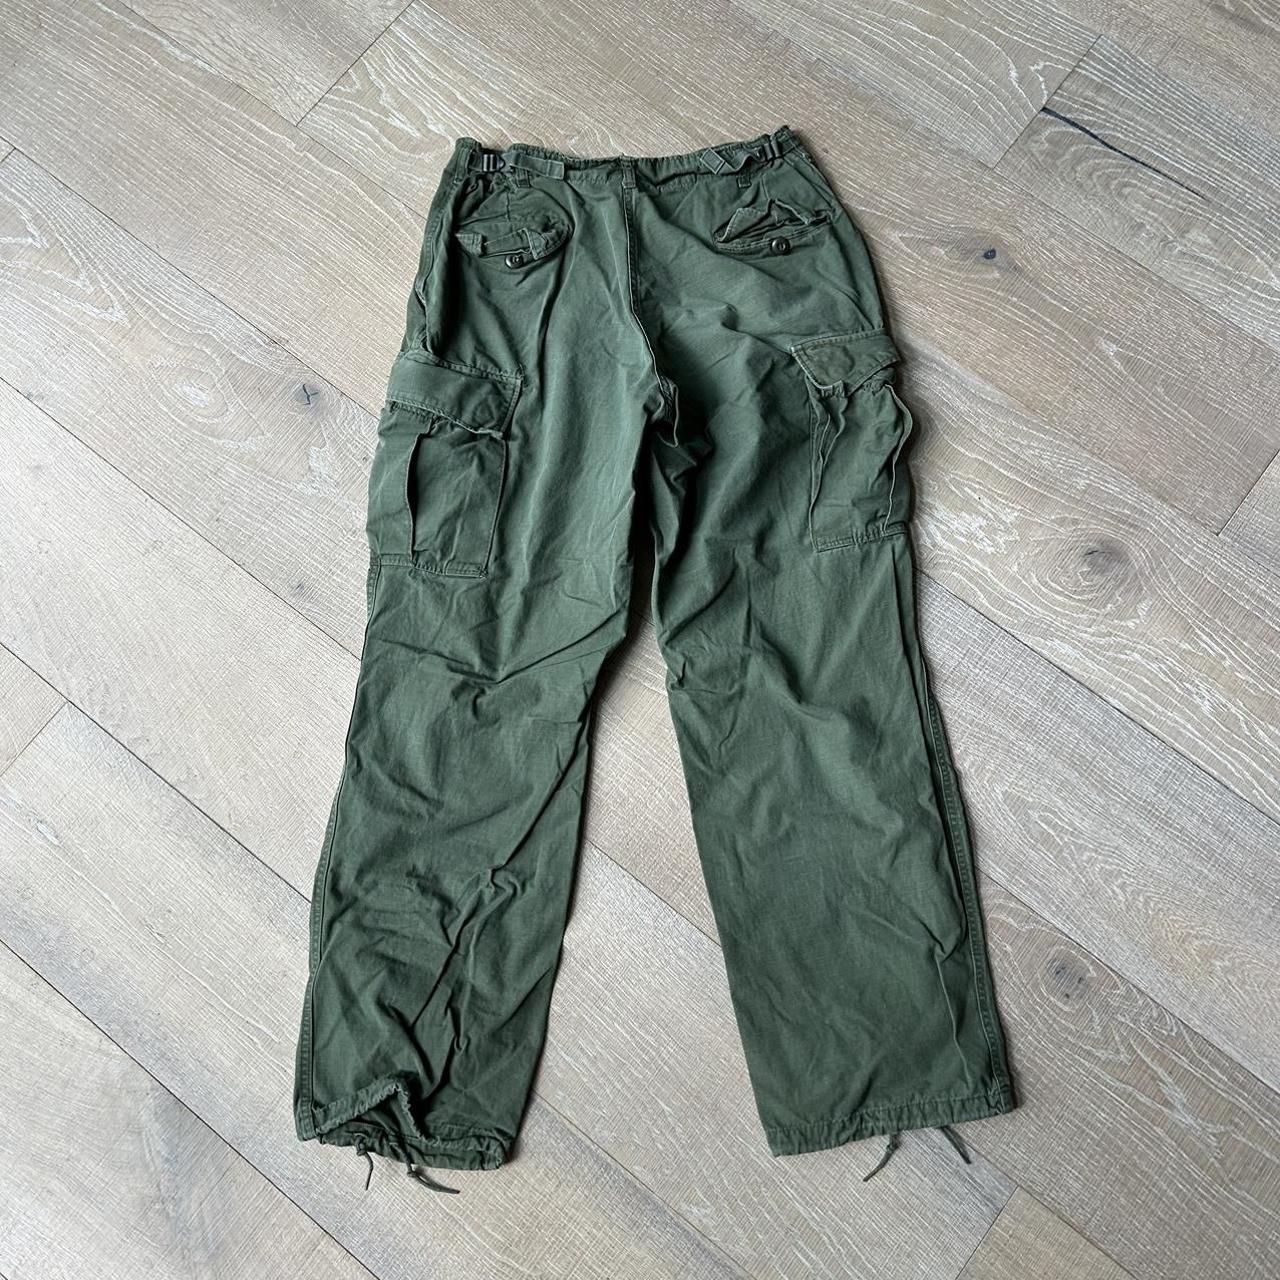 Mid-1900s Military Cargo Pants Size 36-39... - Depop